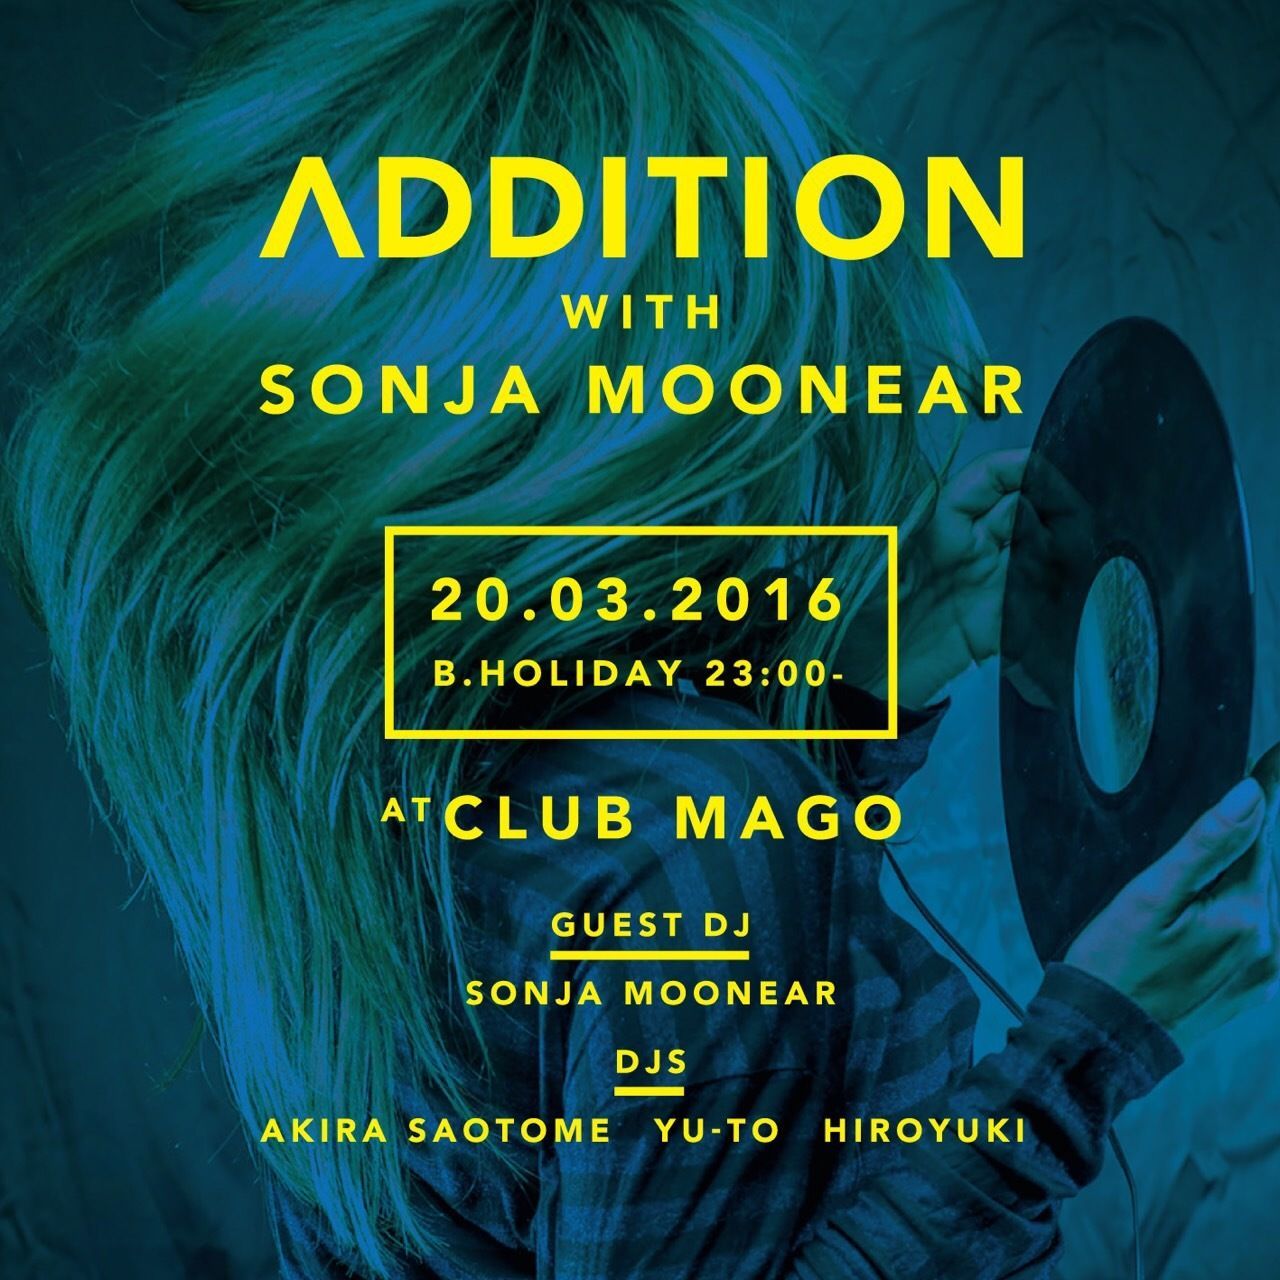 ADDITION with Sonja Moonear